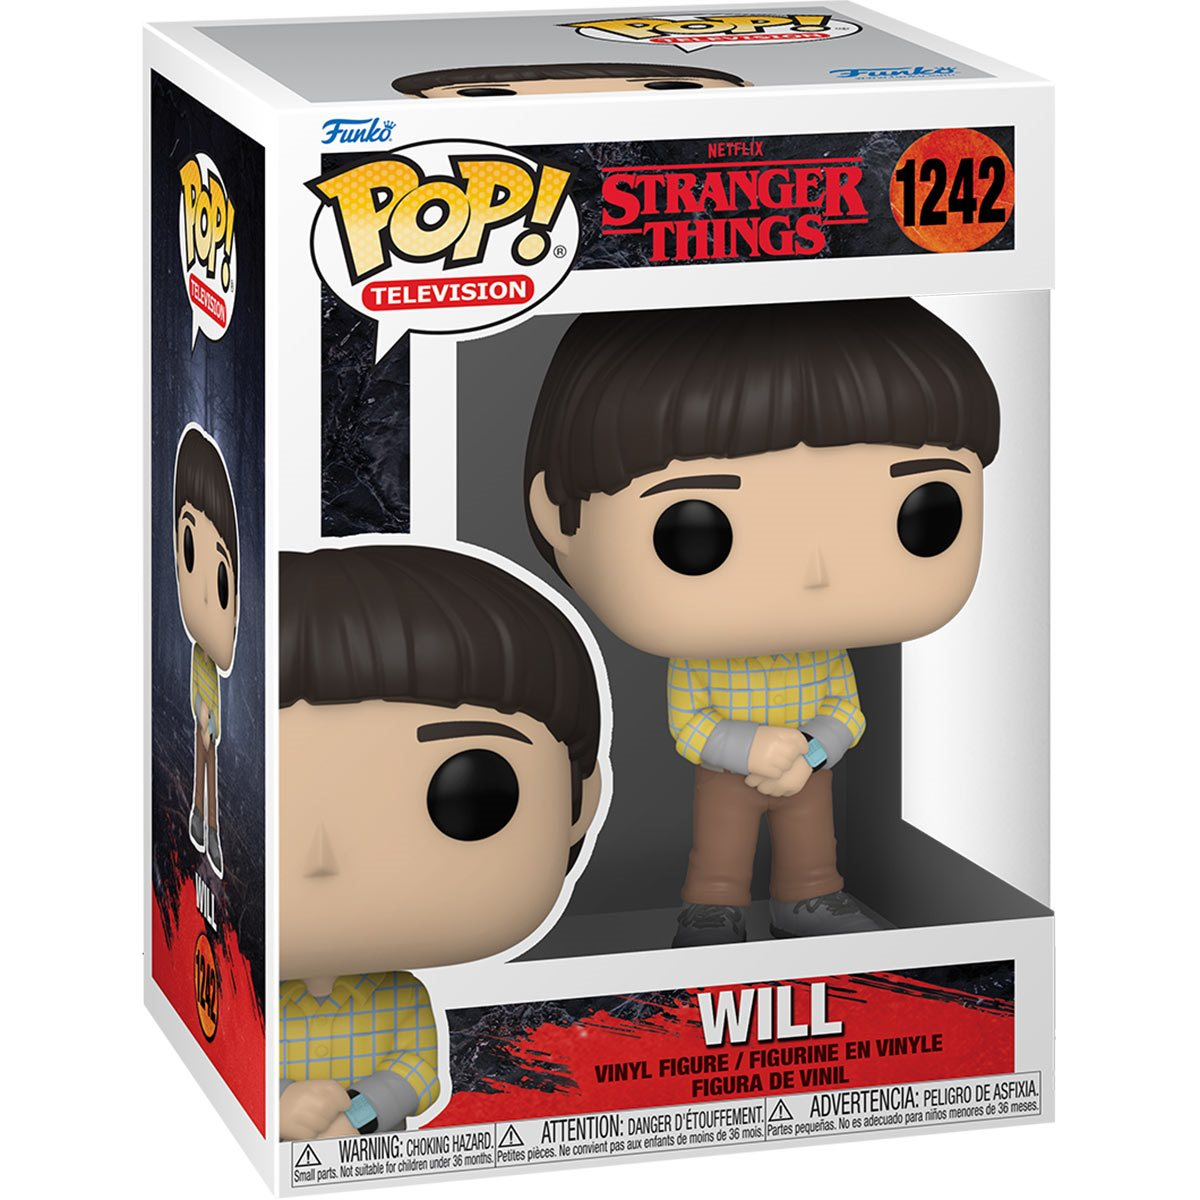 A 4K Chromecast and a Stranger Things Funko Pop for $29? Yes, please